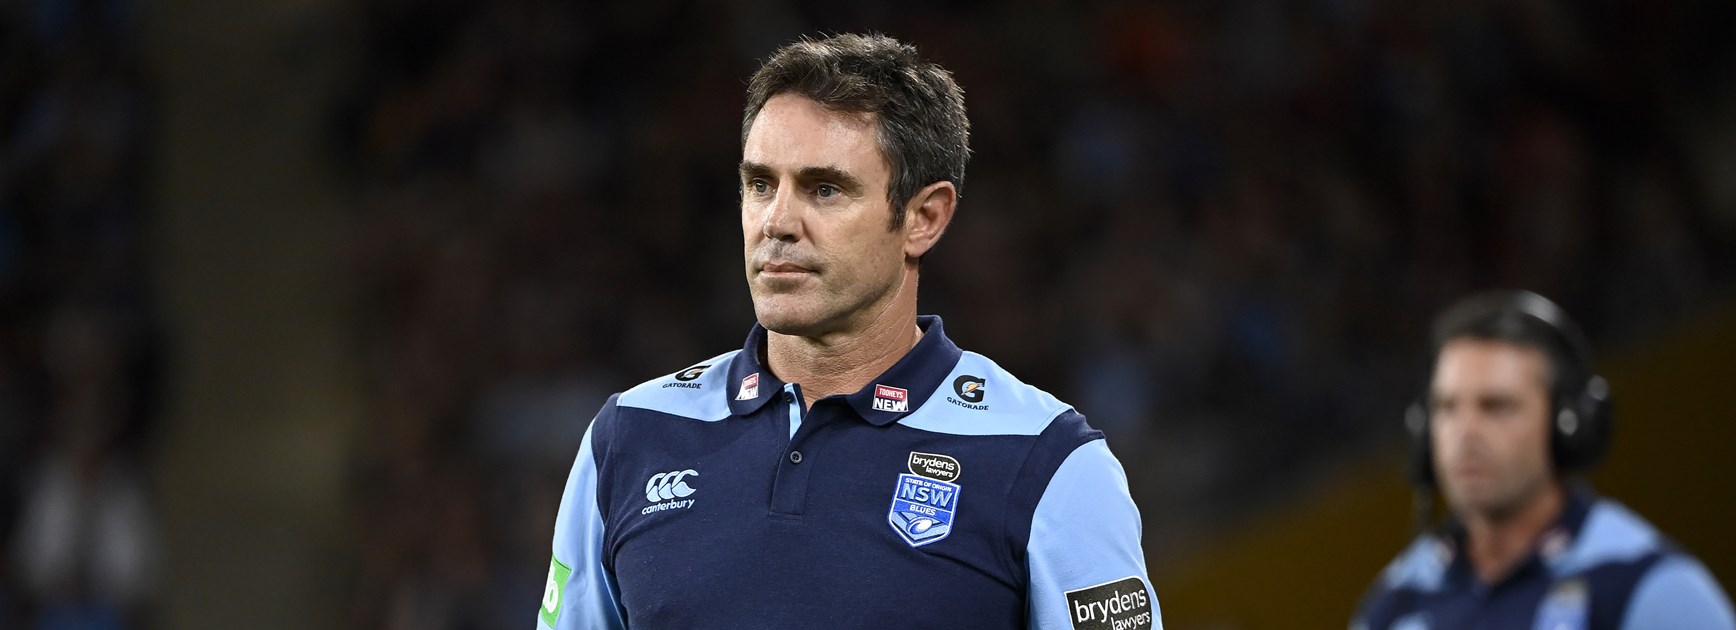 Fittler hints at sticking solid but new rules may change thinking